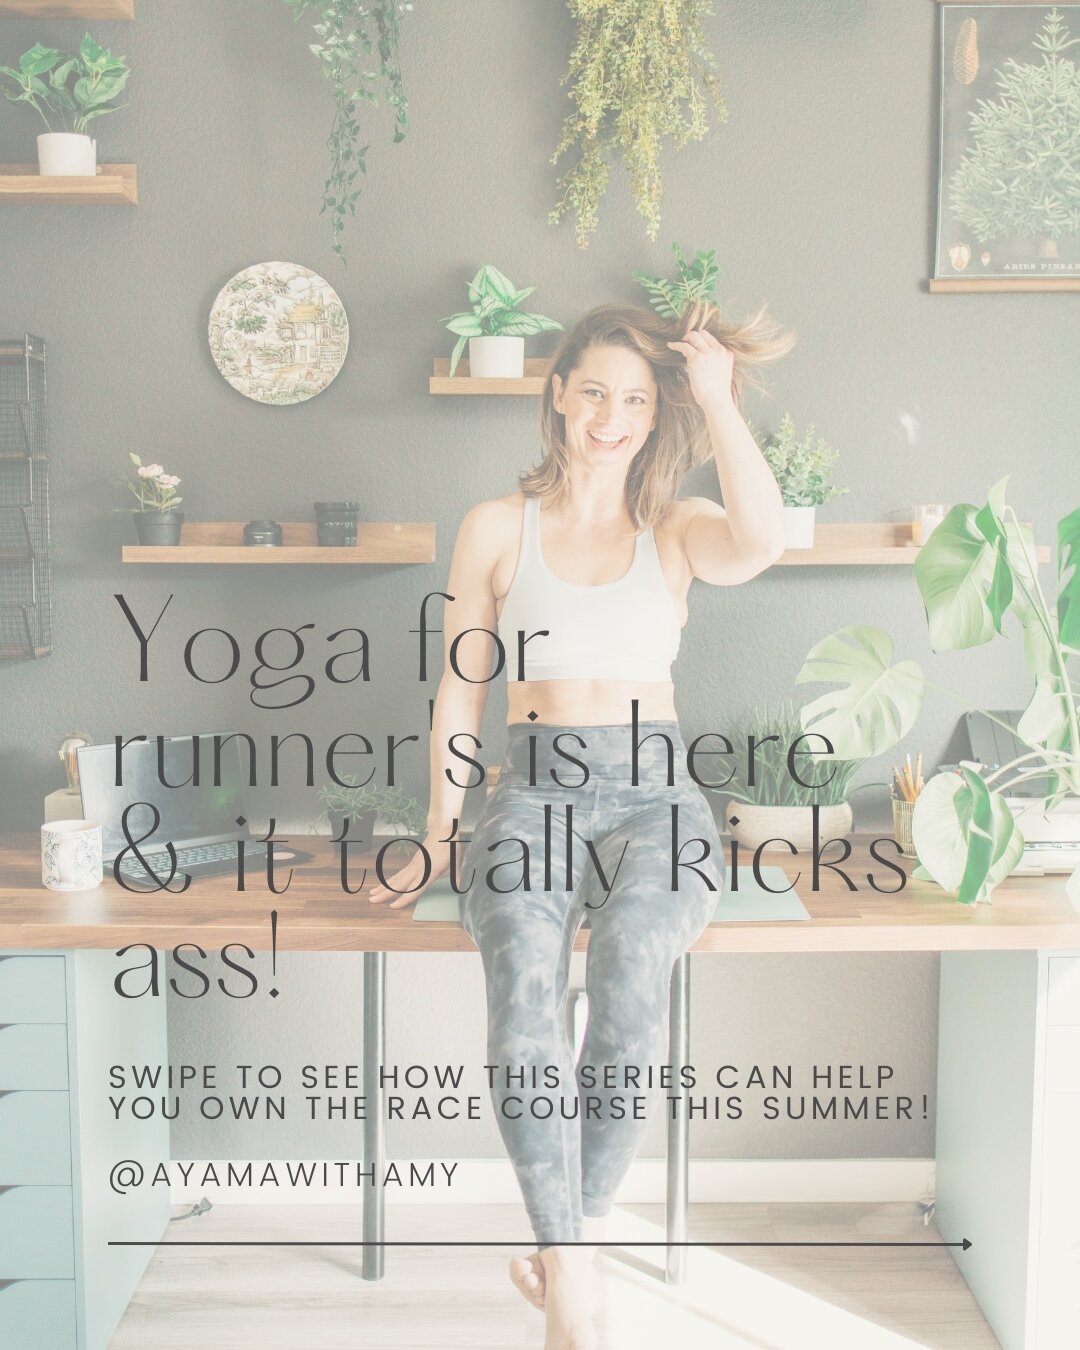 📣📣📣Have you heard the news?! Yoga for runners is here and it's going to change the way you run for the better!⁠
⁠
Do you want to: ⁠
⁠
✅Stay injury free all summer long? ⁠
✅Run longer &amp; faster? ⁠
✅Get quality training miles so you can own the r